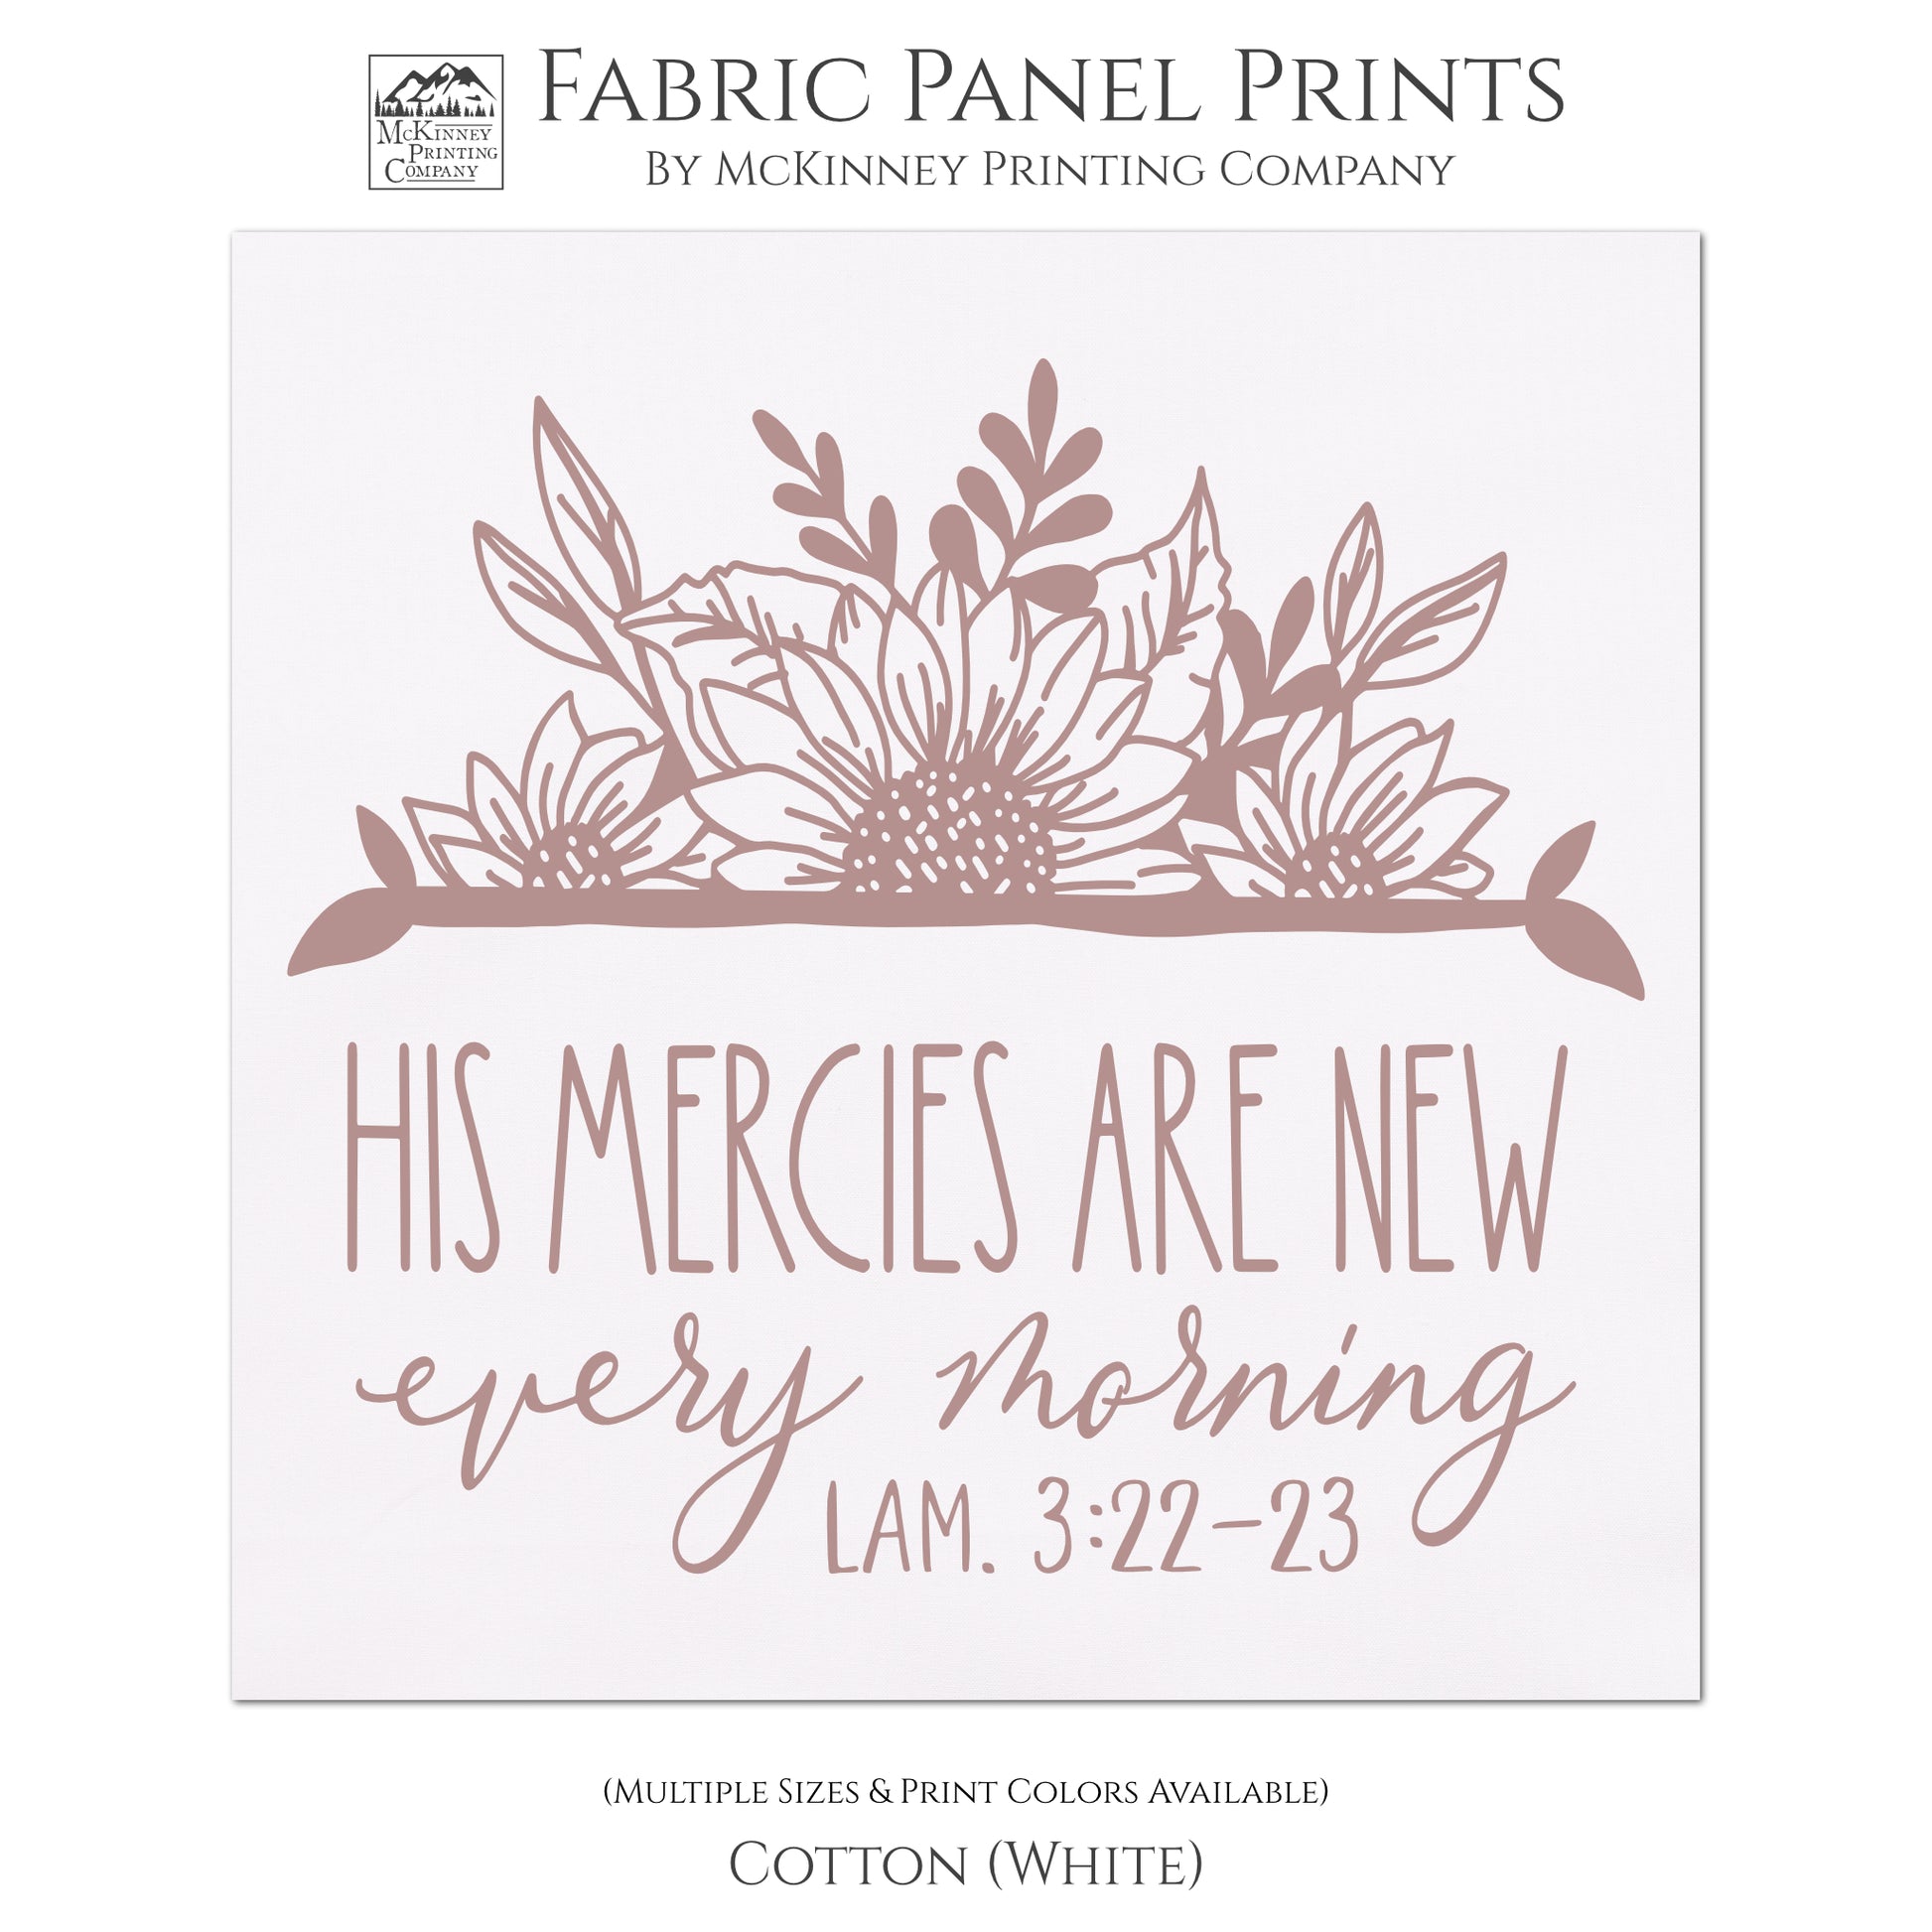 His mercies are new every morning - Lamentations 3 22, Quotes About Life, Inspirational, Religious Fabric, Christian Scripture, Fabric Panel Print, Quilt Block - Cotton, White